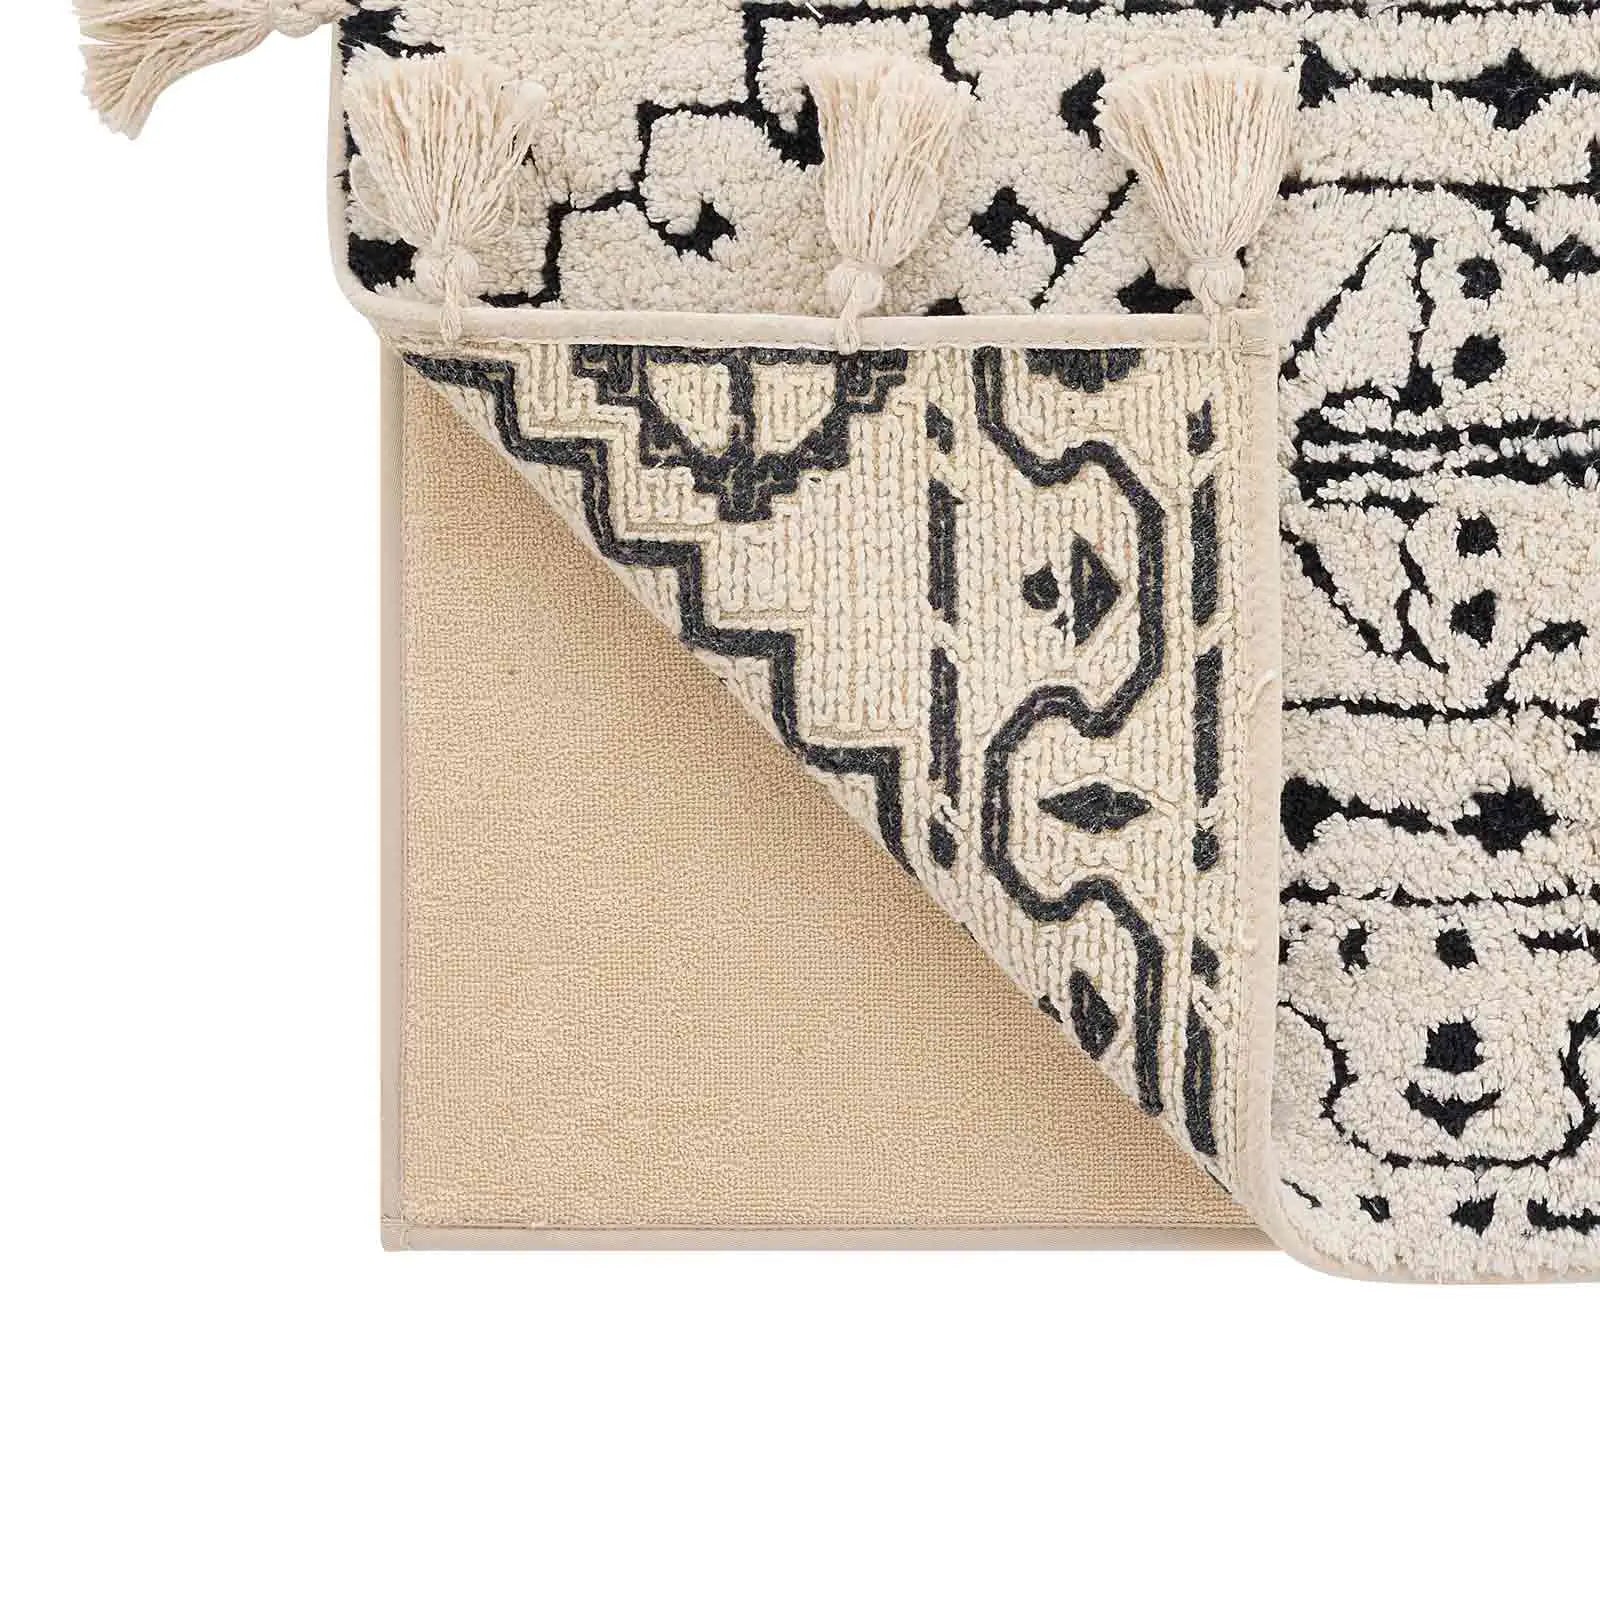 Corner of the arden noir black and white persian rug pattern bath mat lifted up to show the foam liner beneath